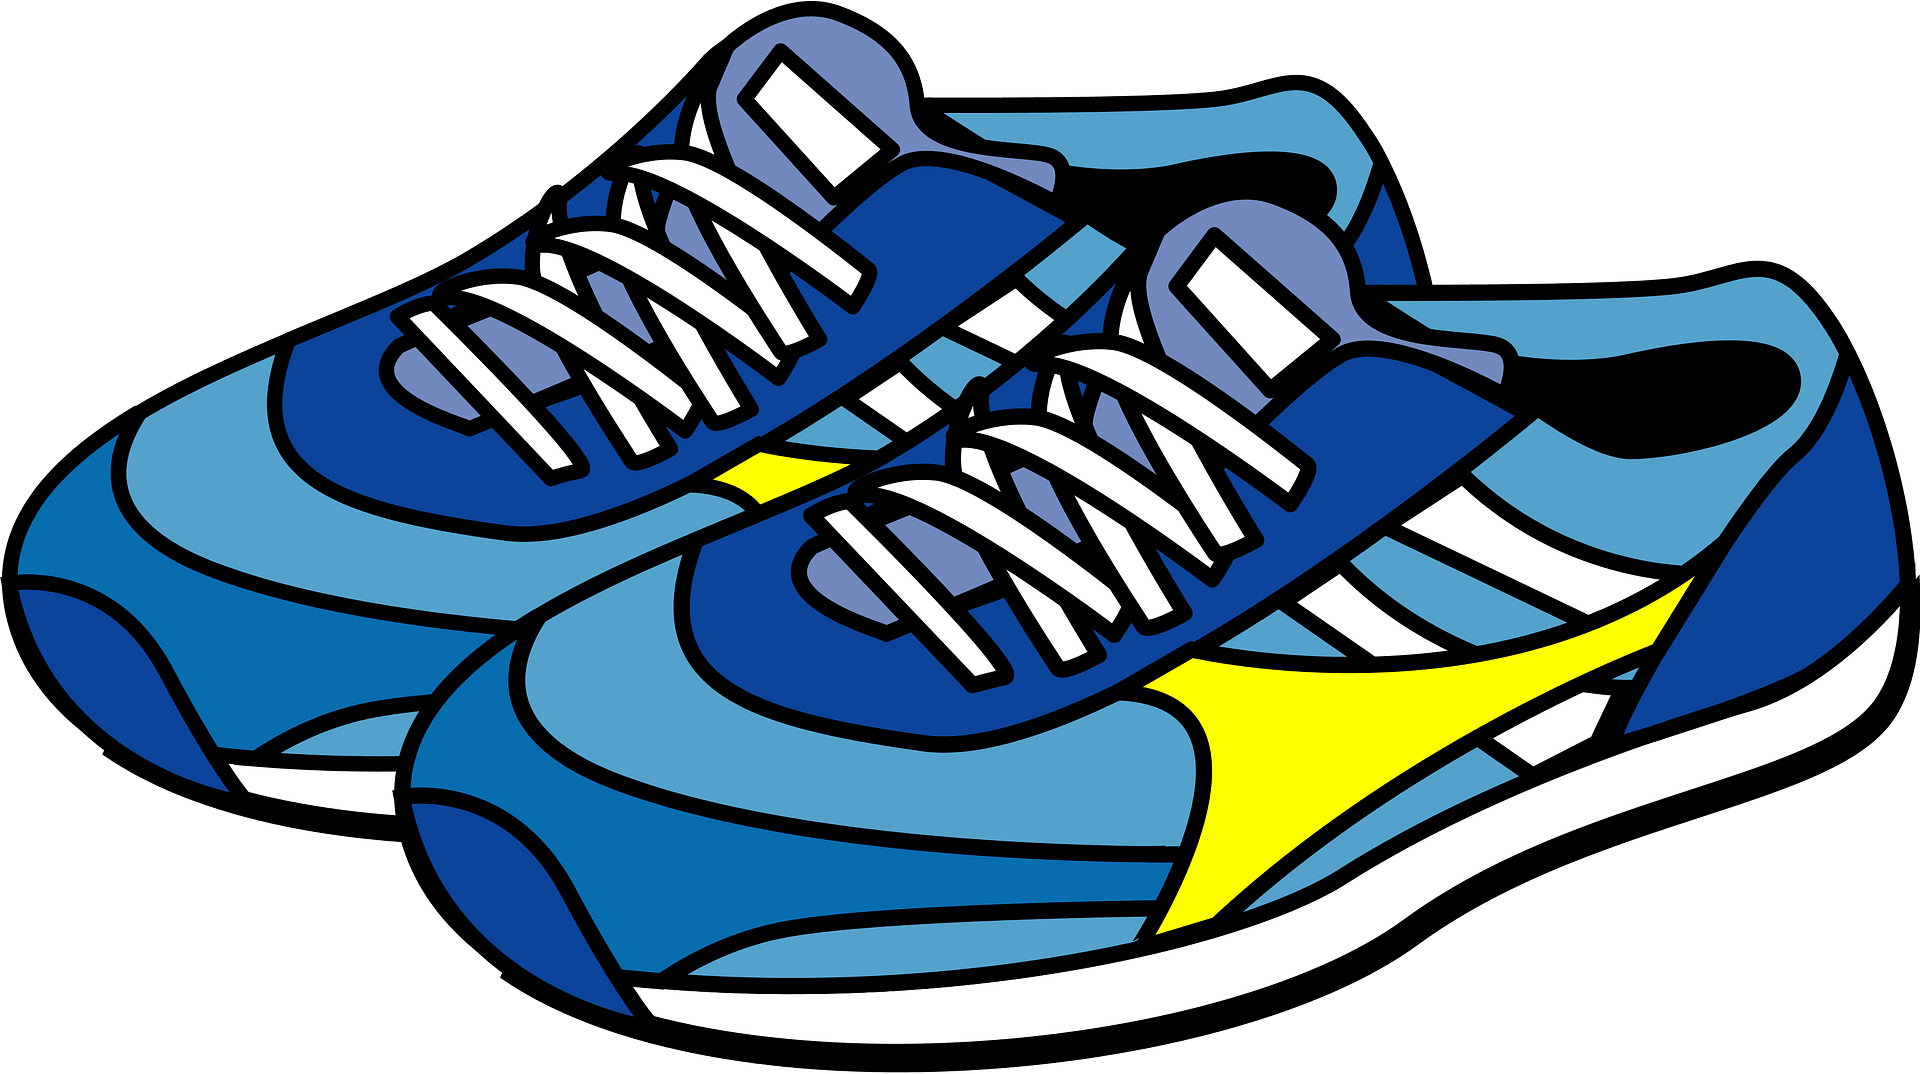 Shoes Clipart Graphic by Illustrately · Creative Fabrica - Clip Art Library